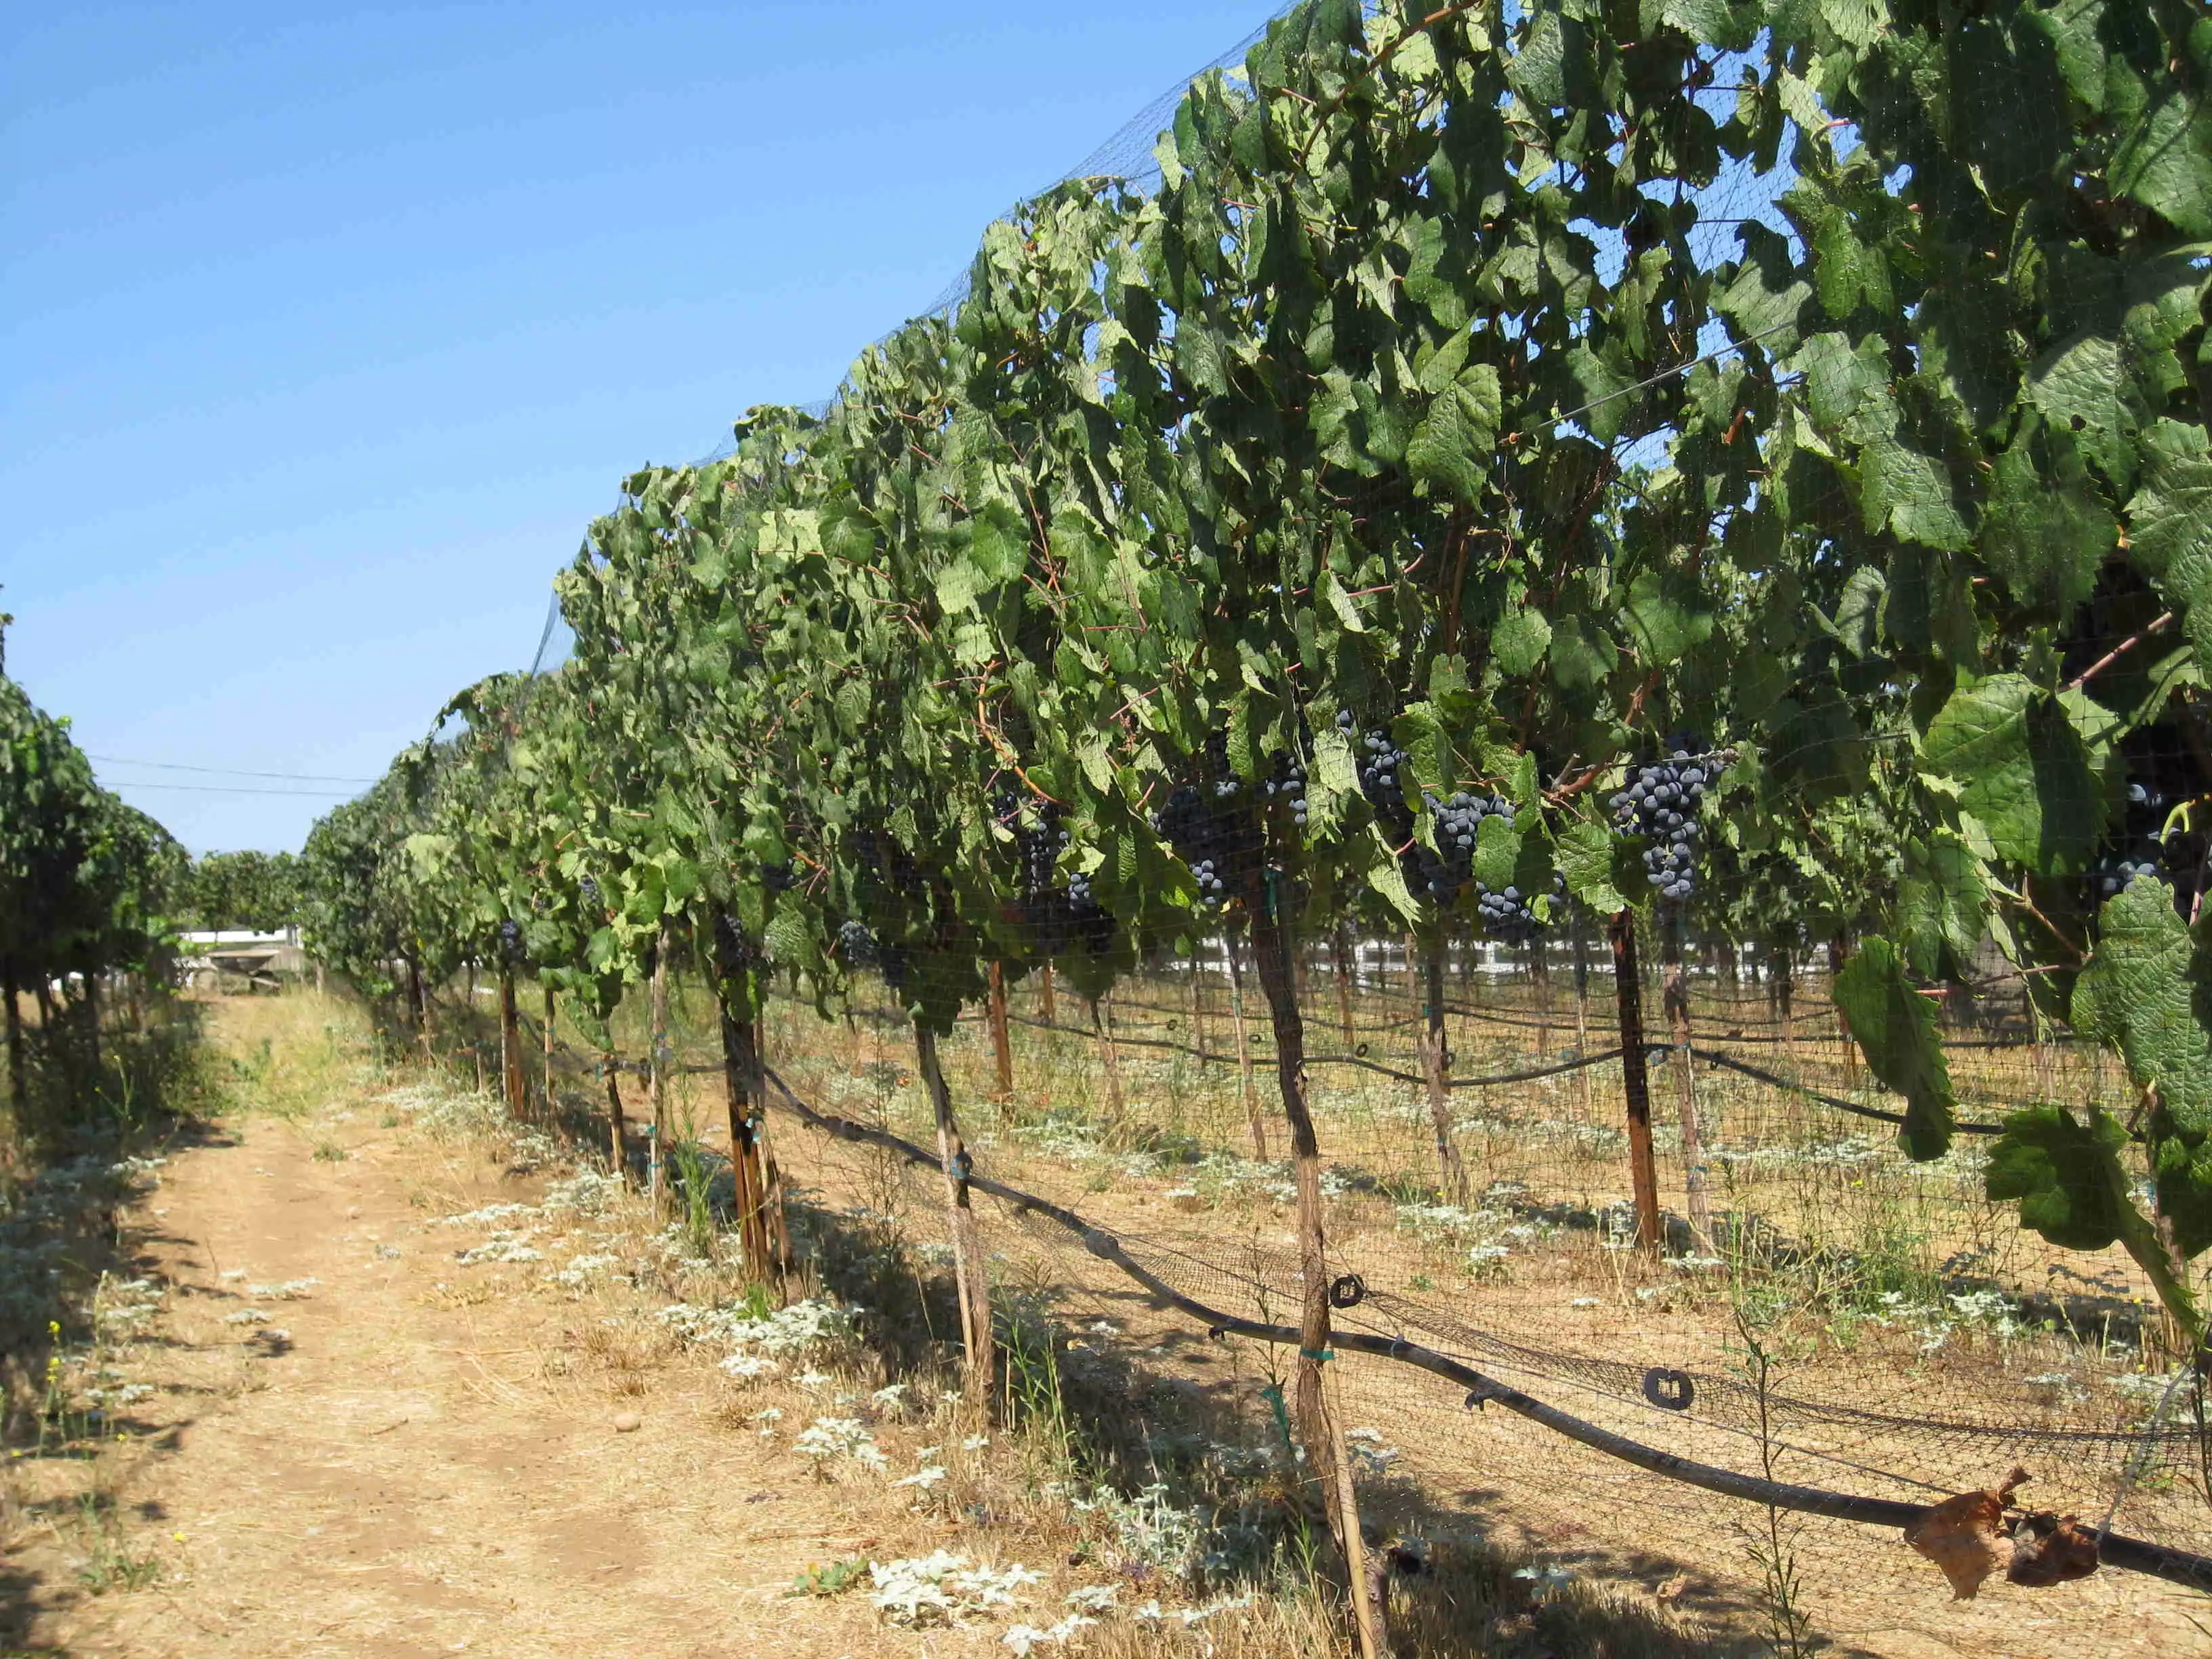 Picture of Vineyard in 2008